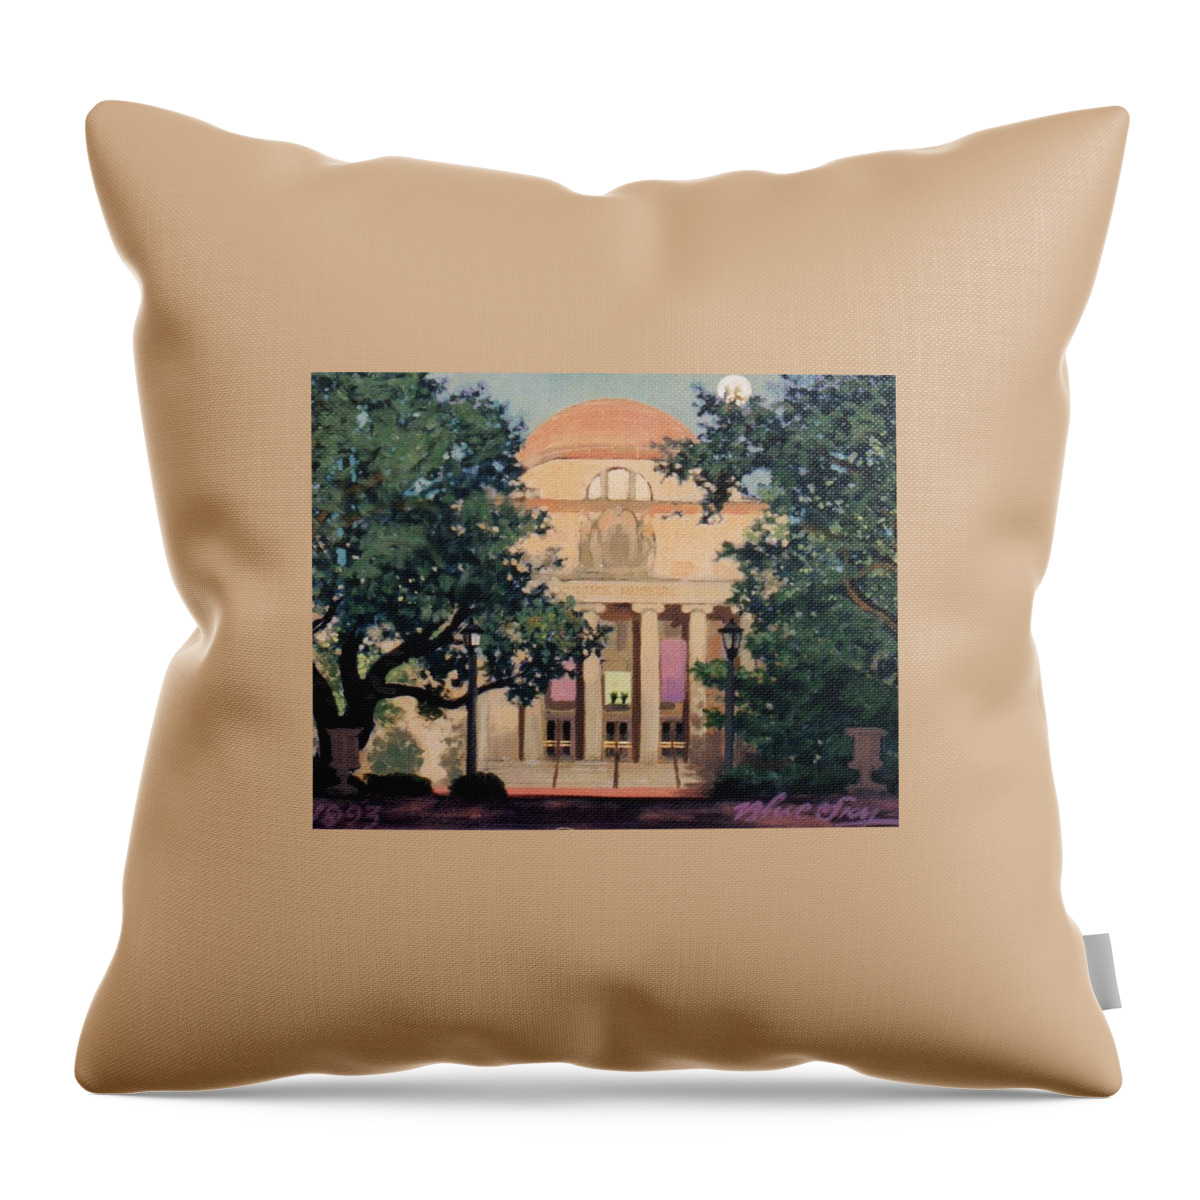 Mckissick Museum Throw Pillow featuring the painting McKissick Museum by Blue Sky